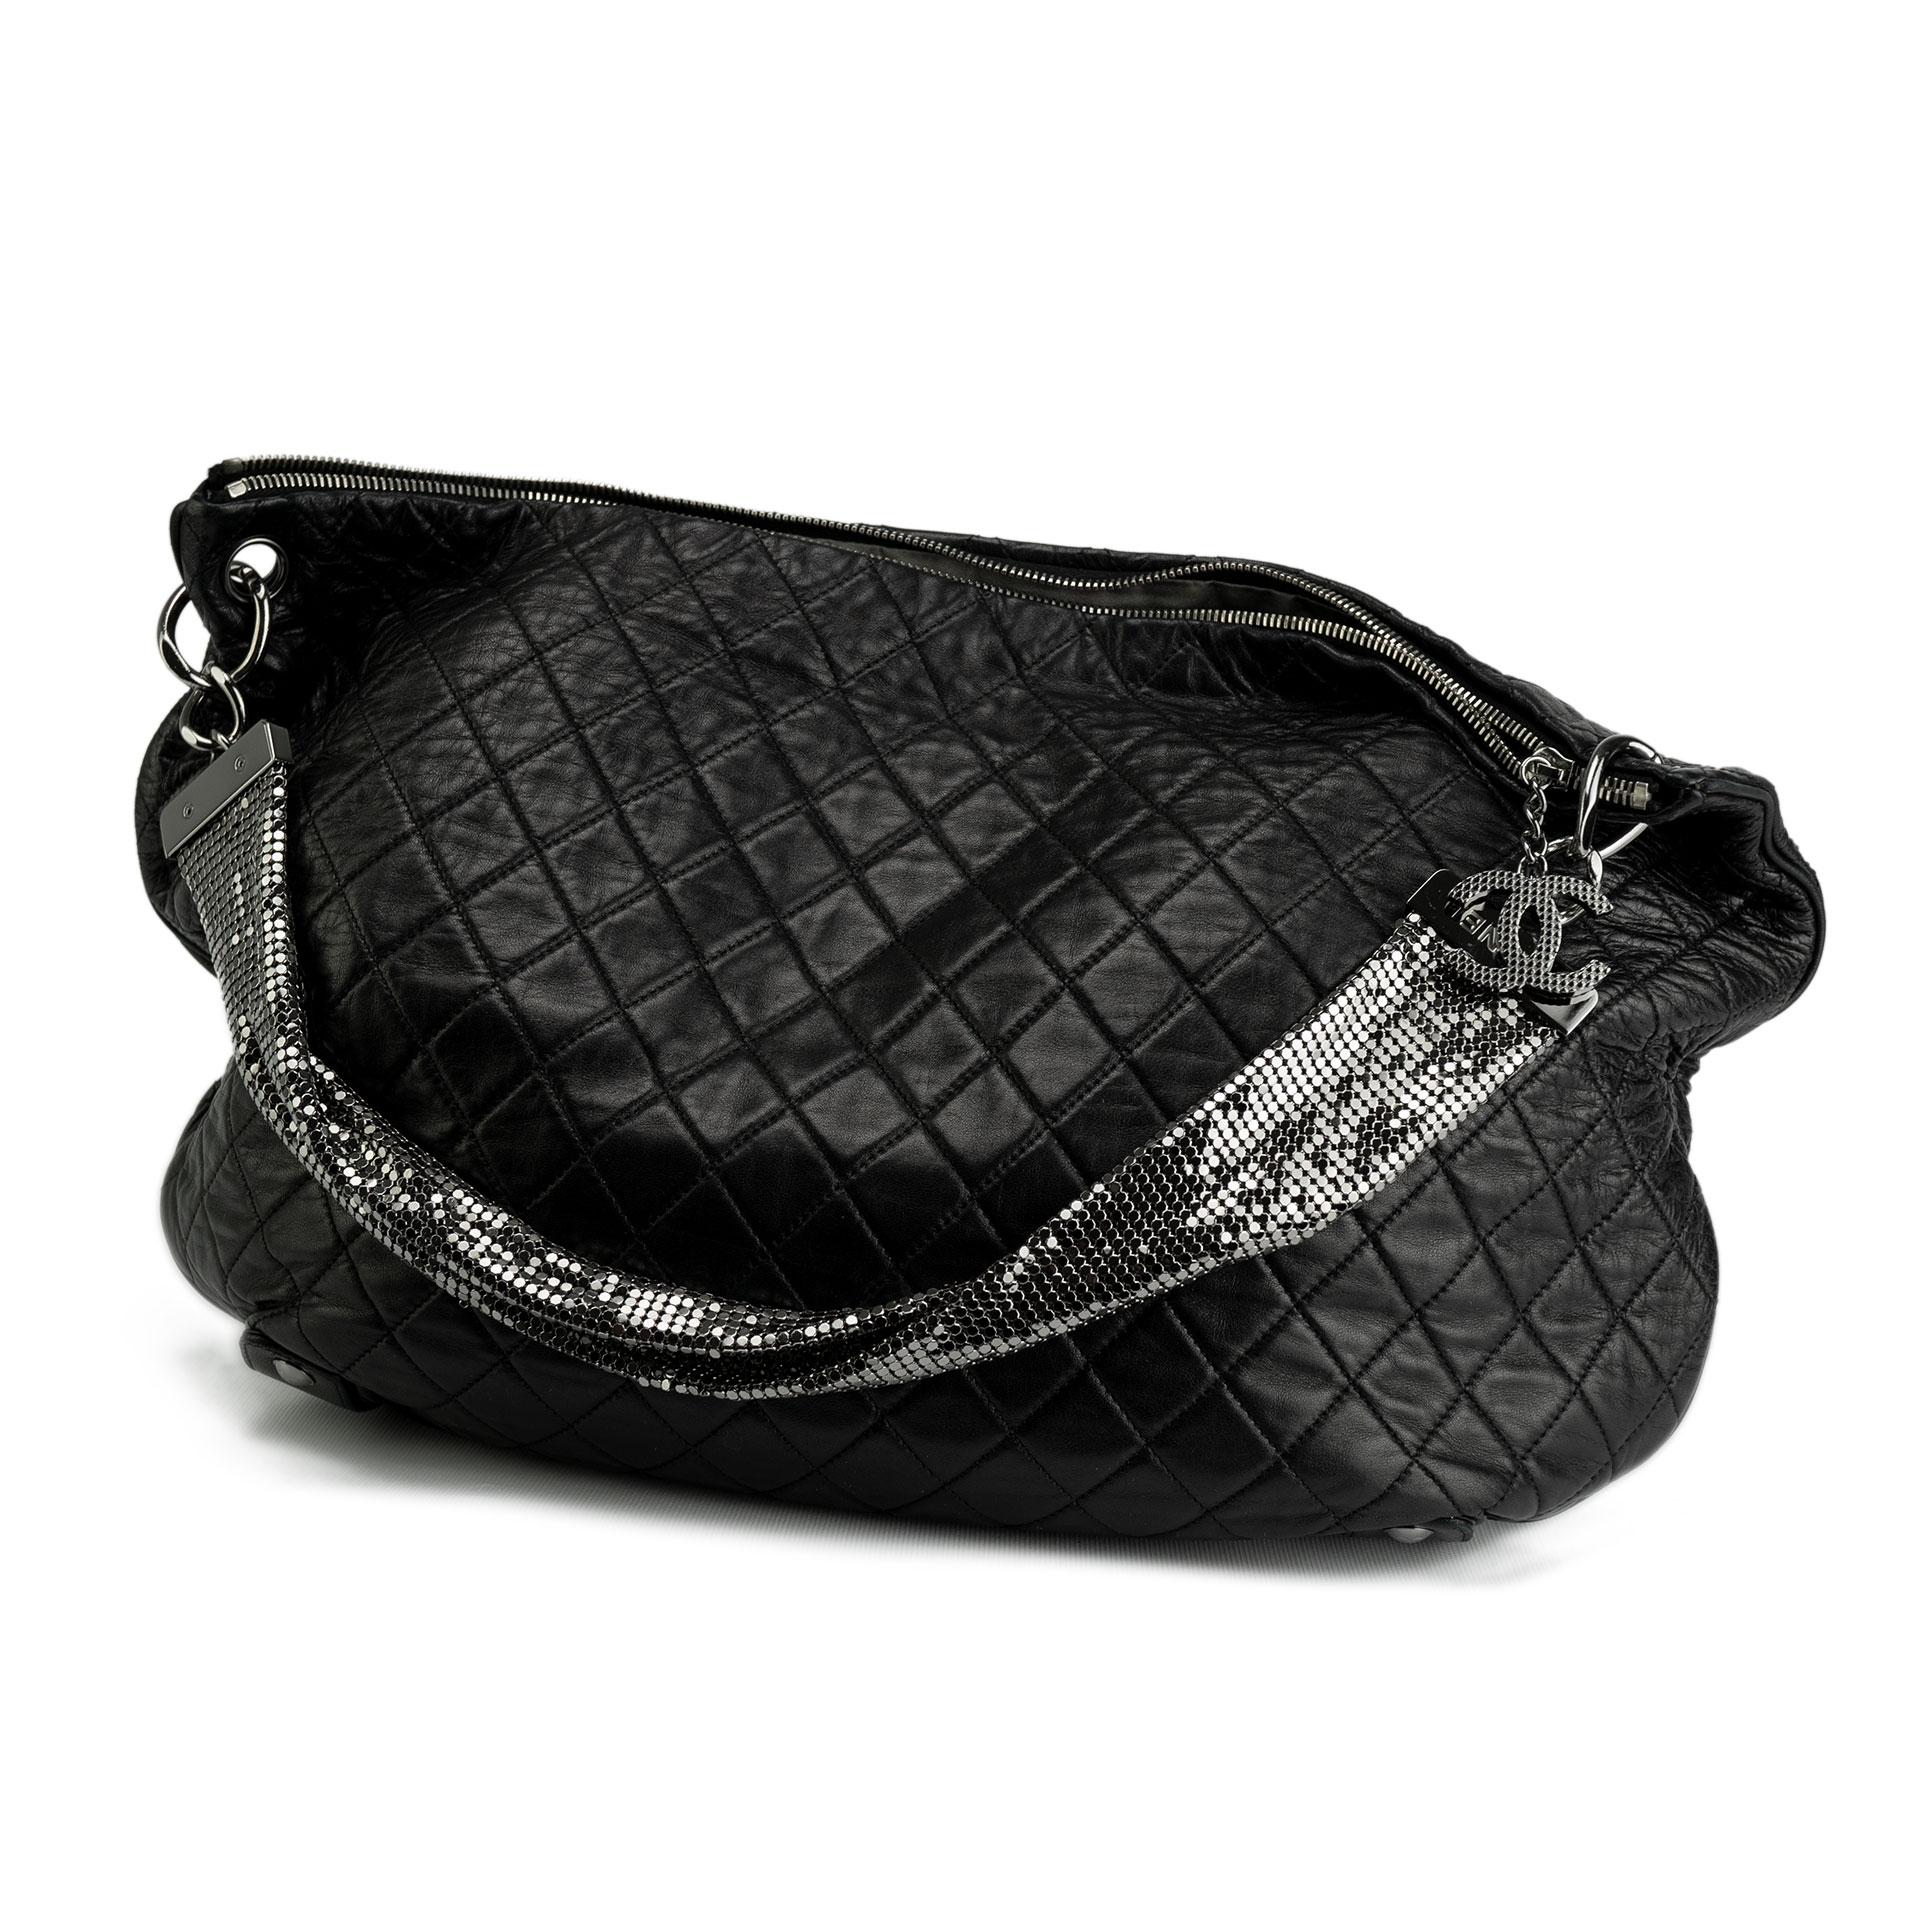 Chanel 2008 Metallic Mesh Soft Quilted Black Lambskin Leather Large Hobo Bag For Sale 3